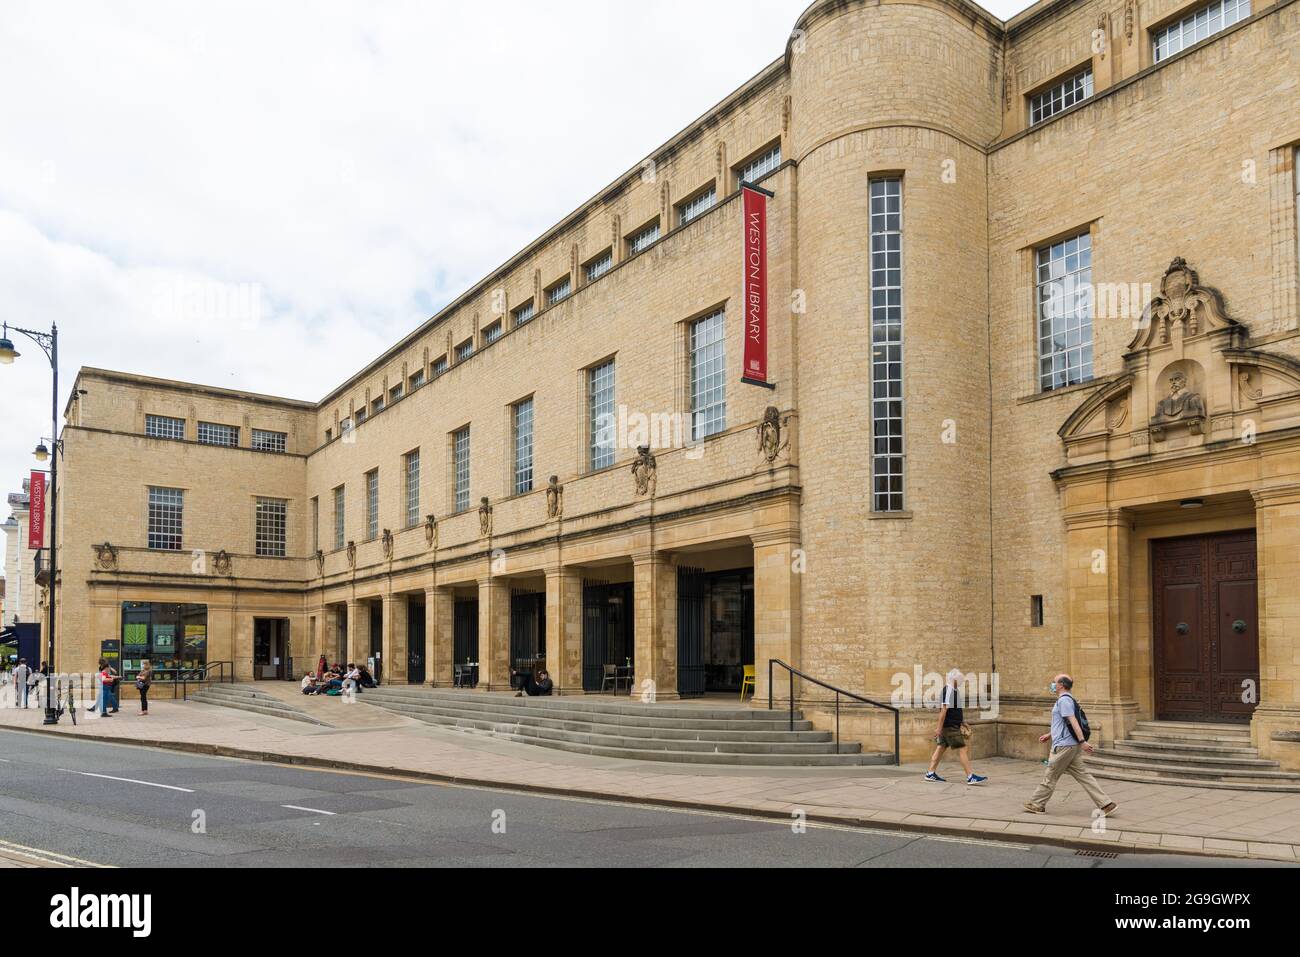 Sir Giles Gilbert Scott’s 1940s, Grade II listed, New Bodleian Library building, now known as the Weston Library, on Broad Street, Oxford, England, UK Stock Photo